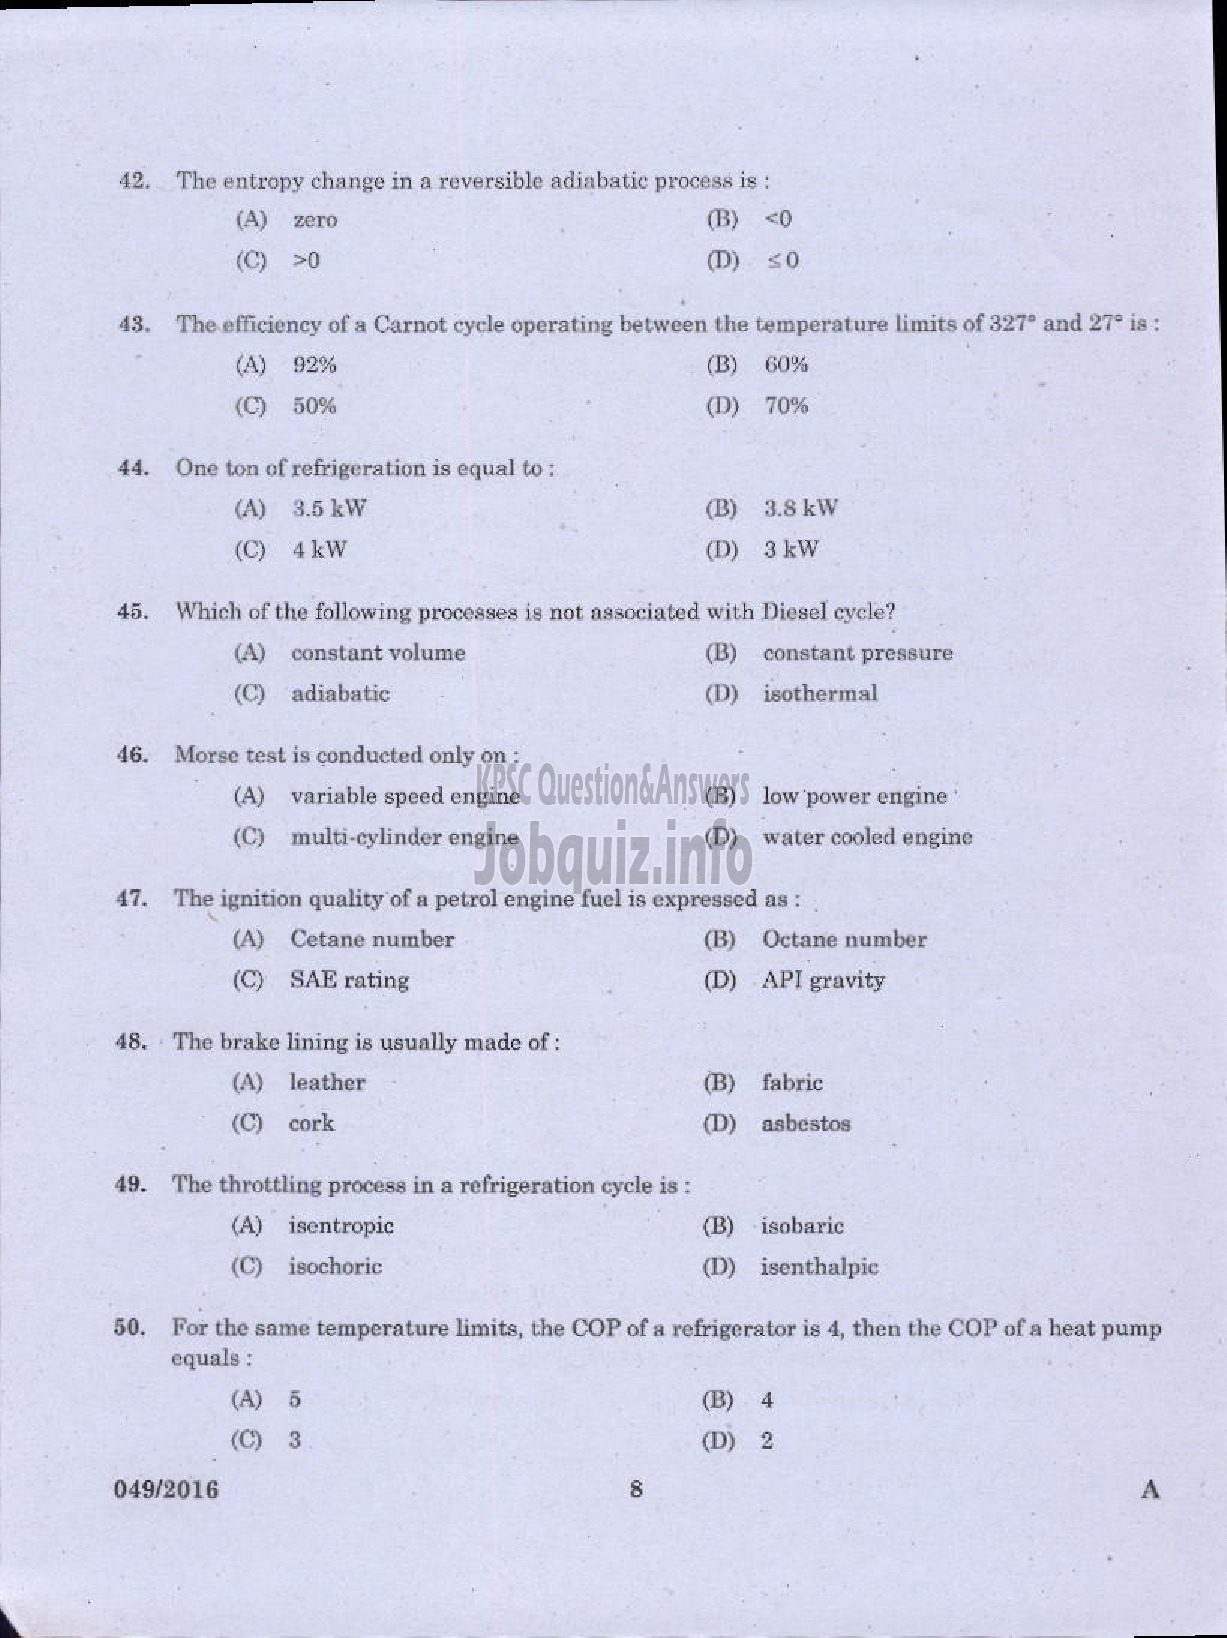 Kerala PSC Question Paper - WORKS MANAGER STATE WATER TRANSPORT-6